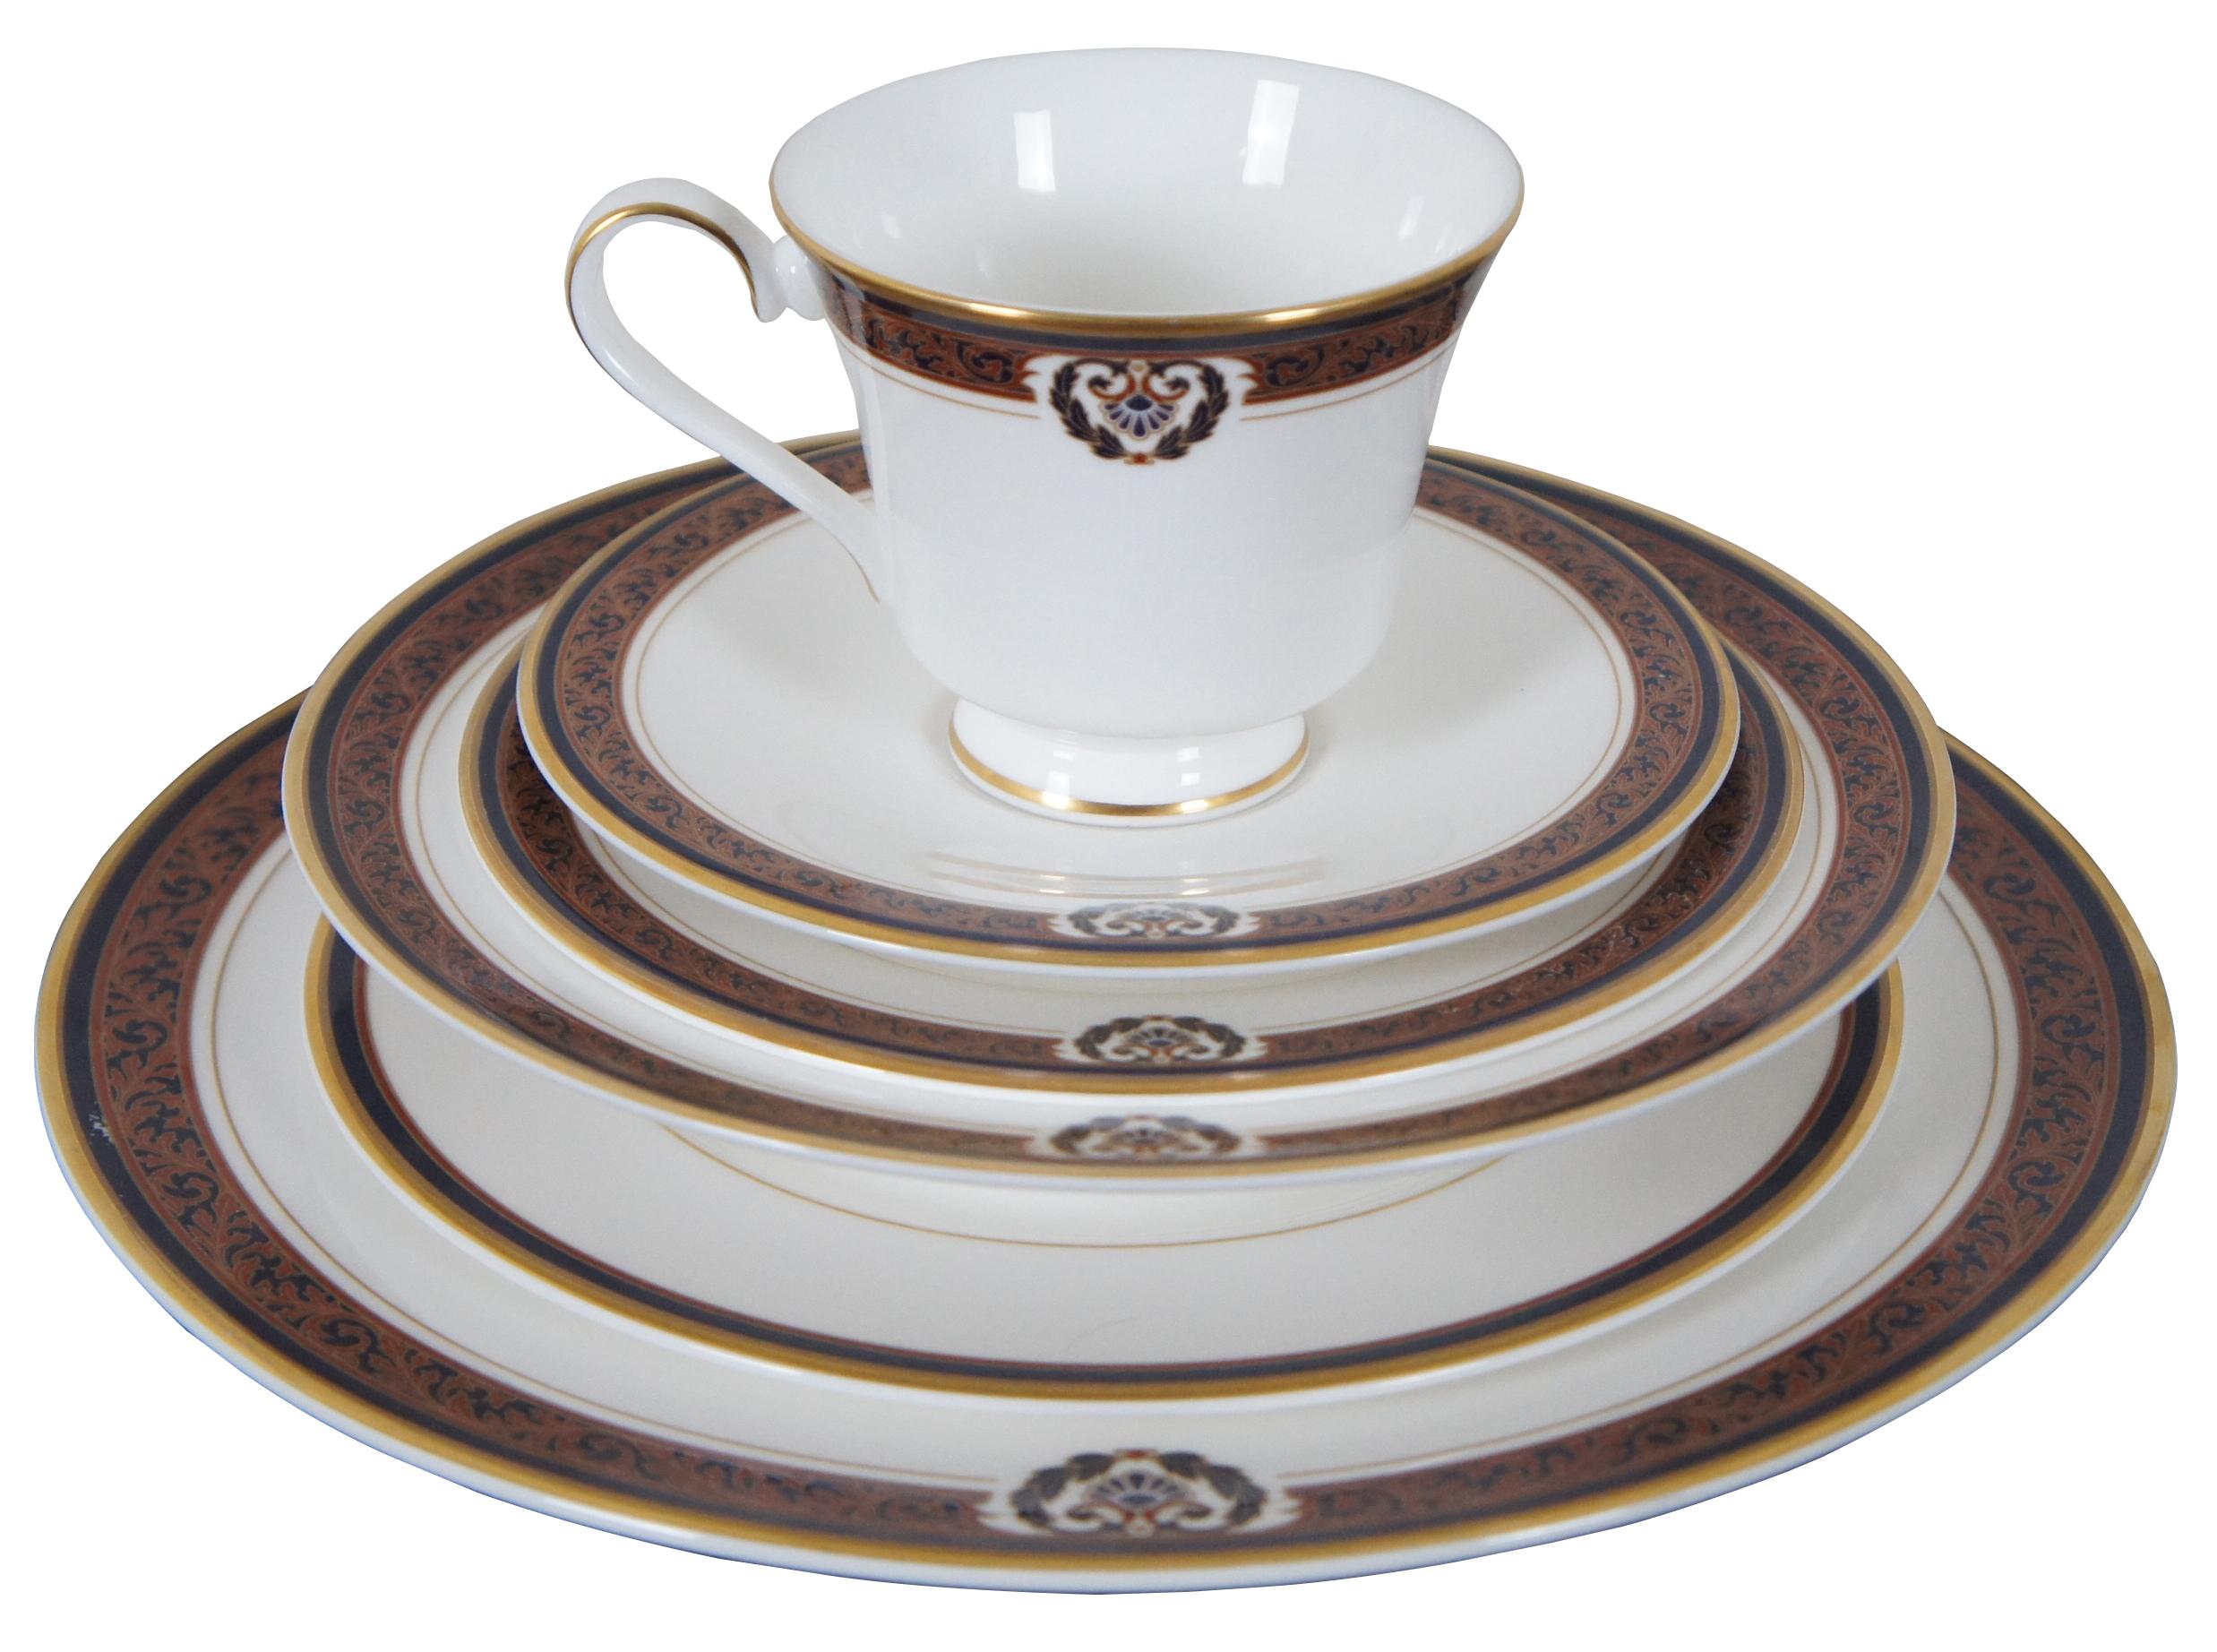 the regal bone china collection